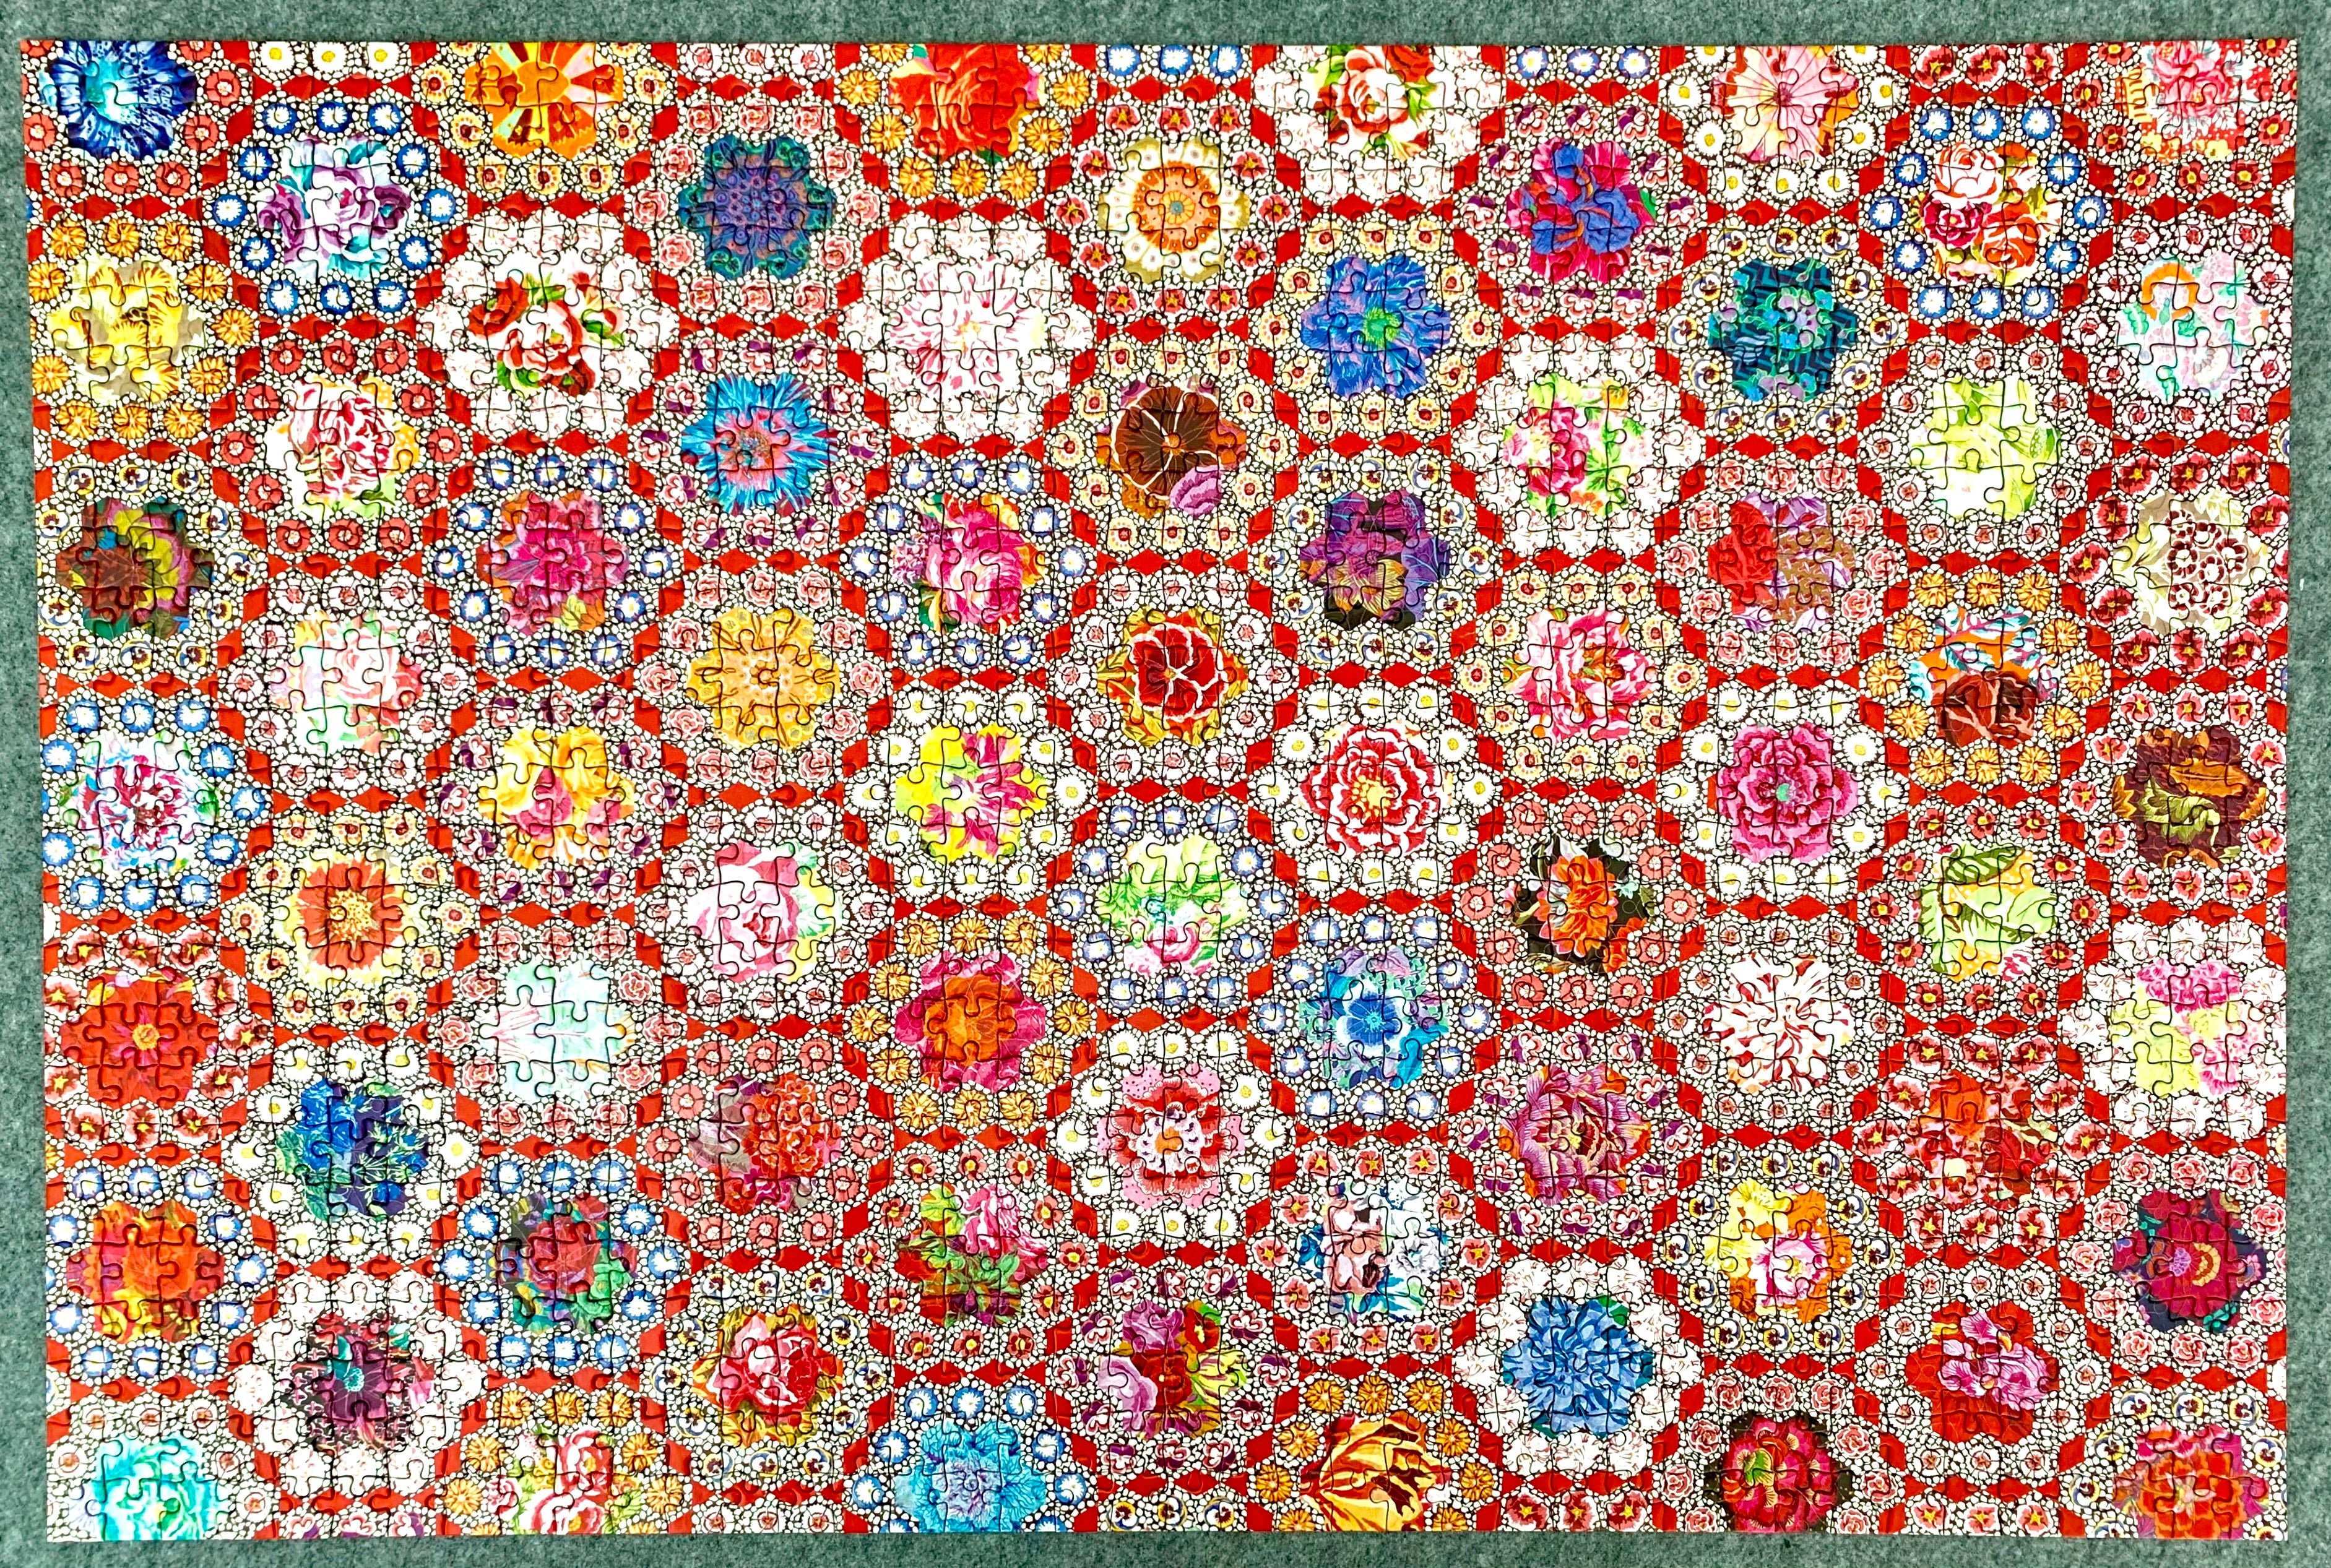 Kaffe Fassett's Diamond Quilt Jigsaw Puzzle for Adults: 1000 pieces,  Dimensions 29.5 x 19.7